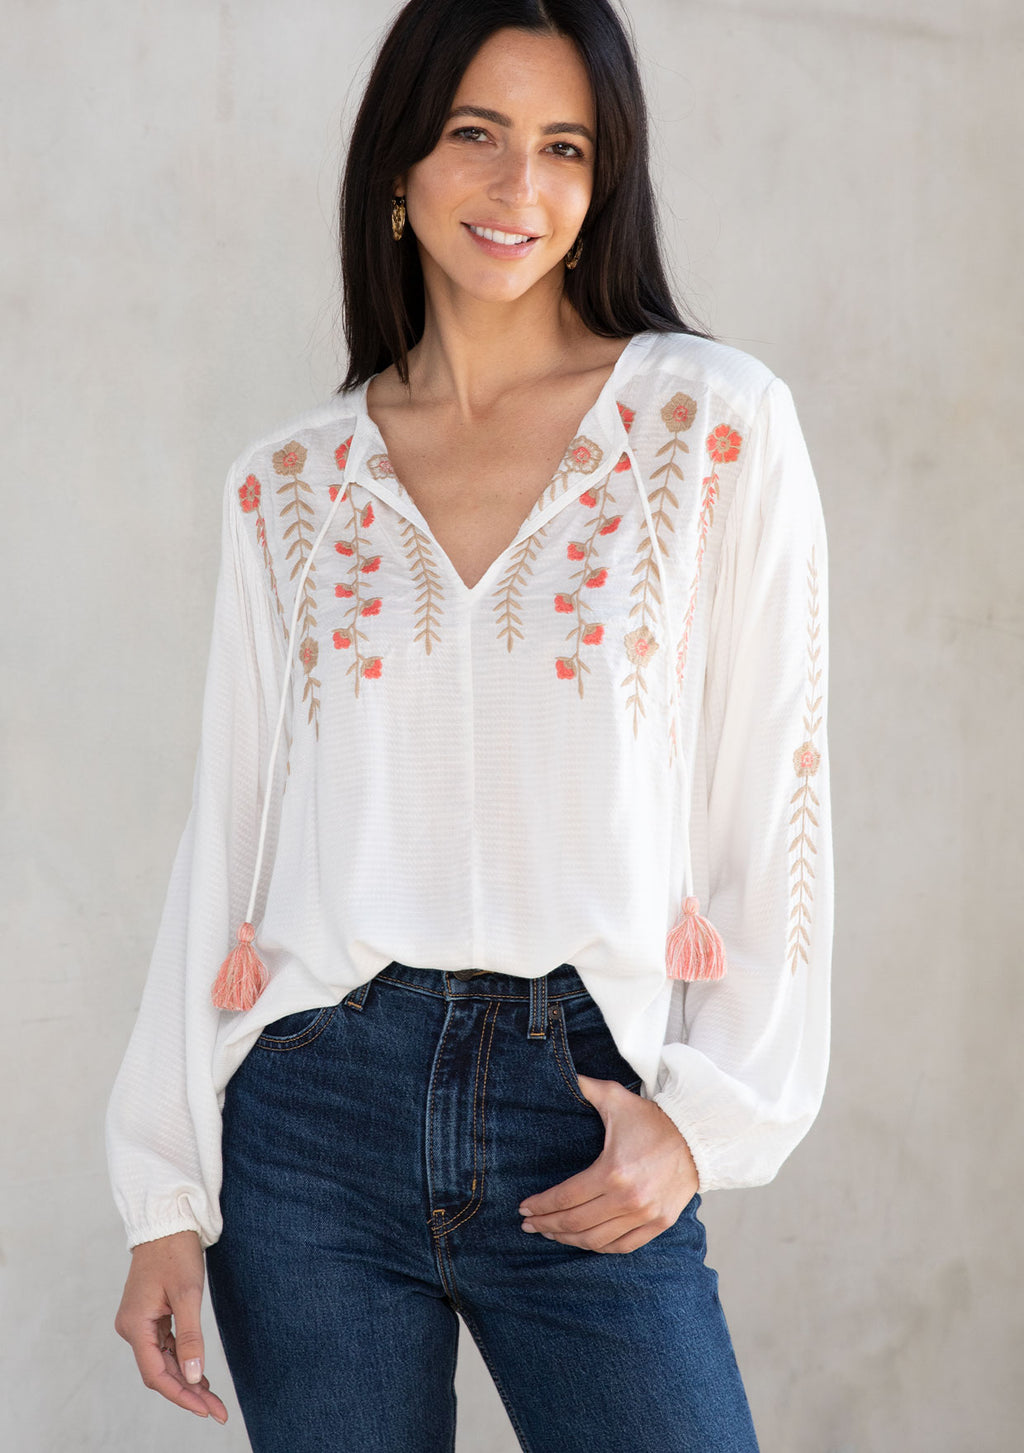 Tassel Tie Embroidered Blouse  Ladies tops fashion, Trendy fashion tops,  Girls fashion clothes